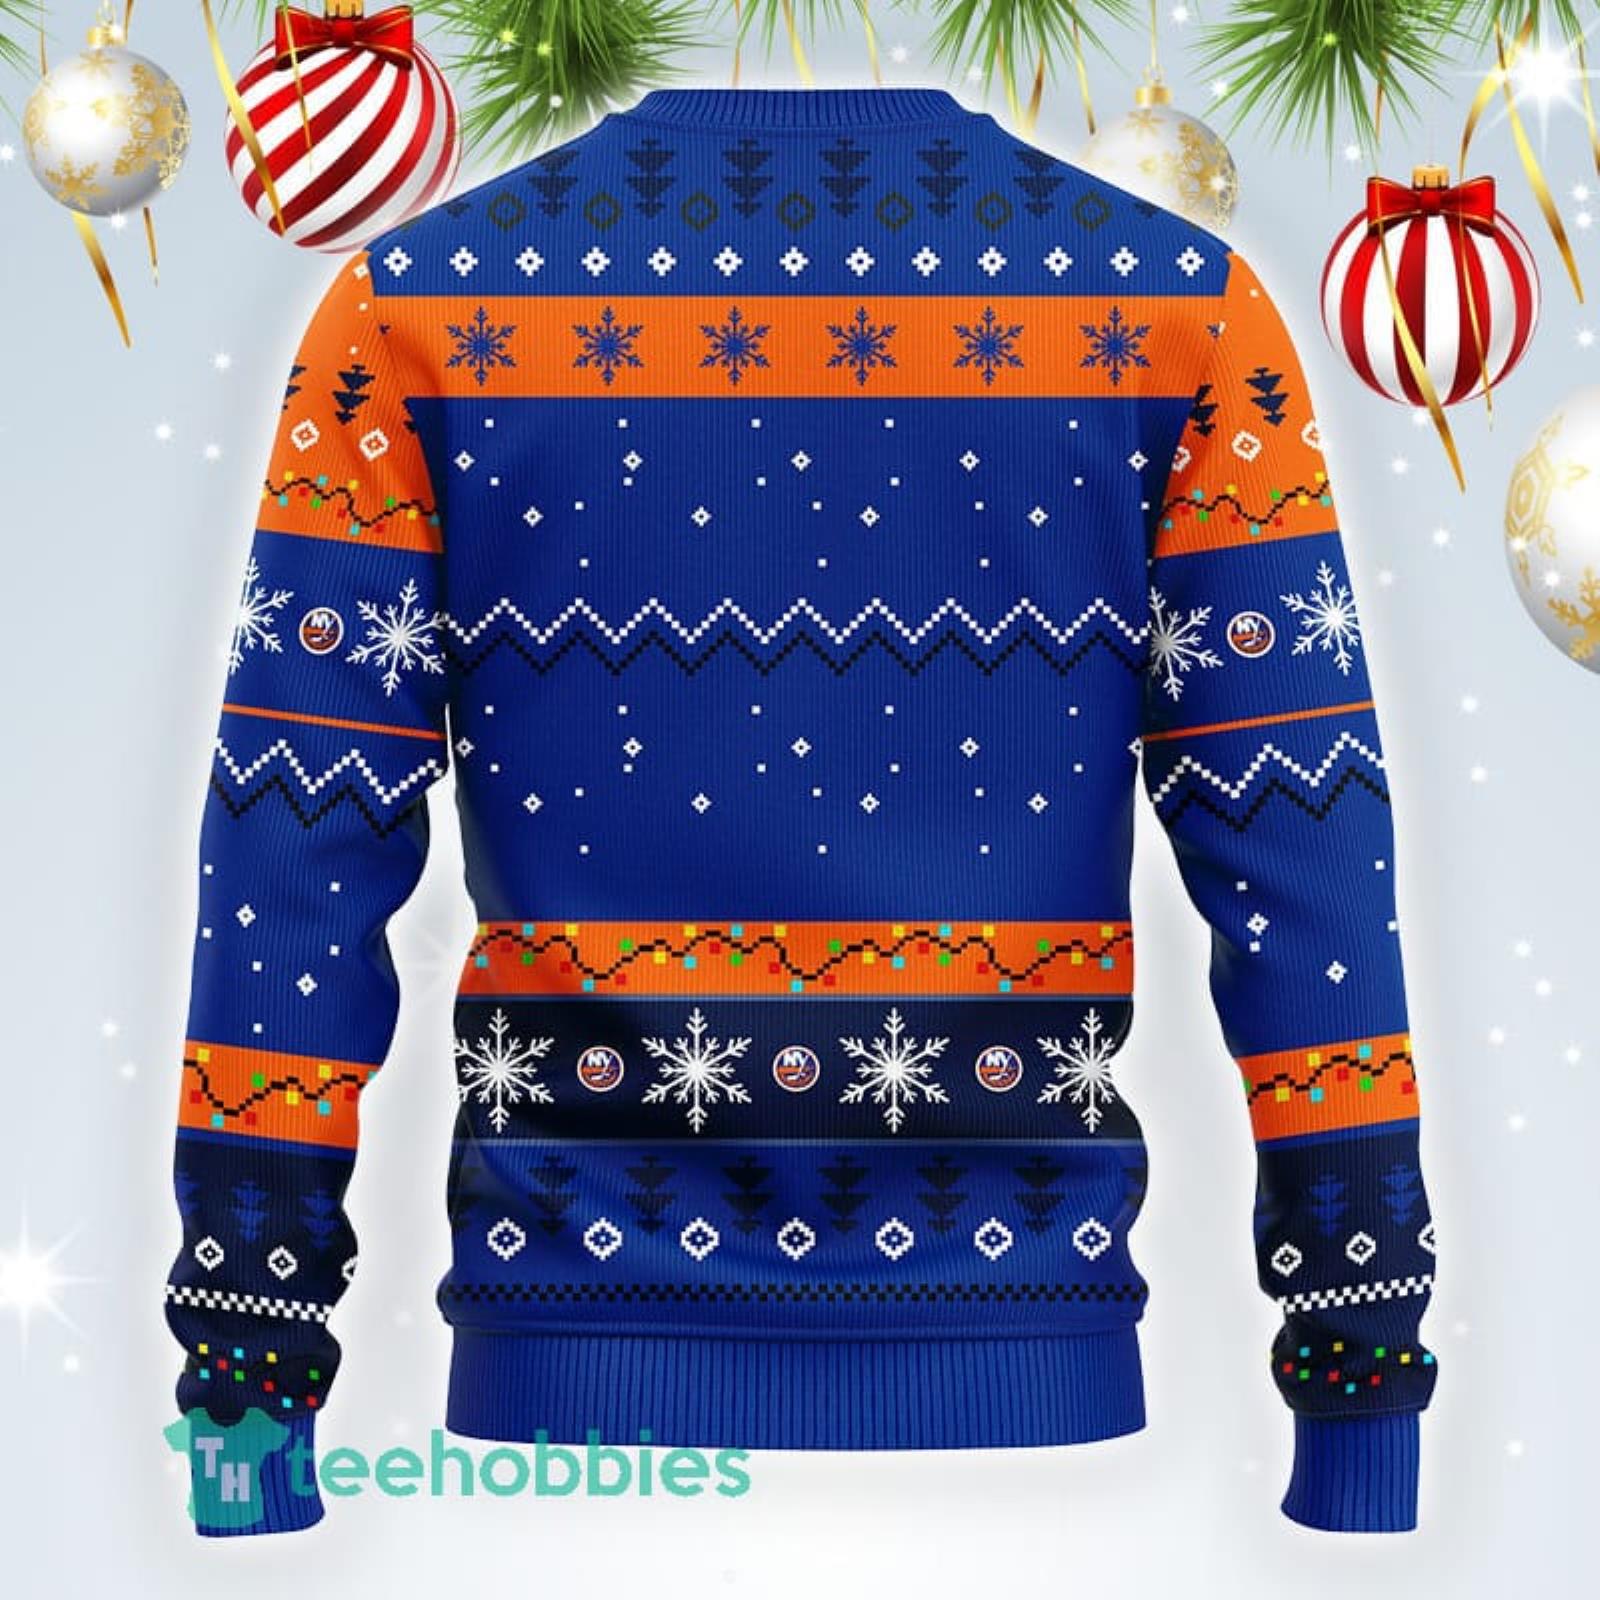 Mens Jumpers & Sweaters, Sports Jumpers